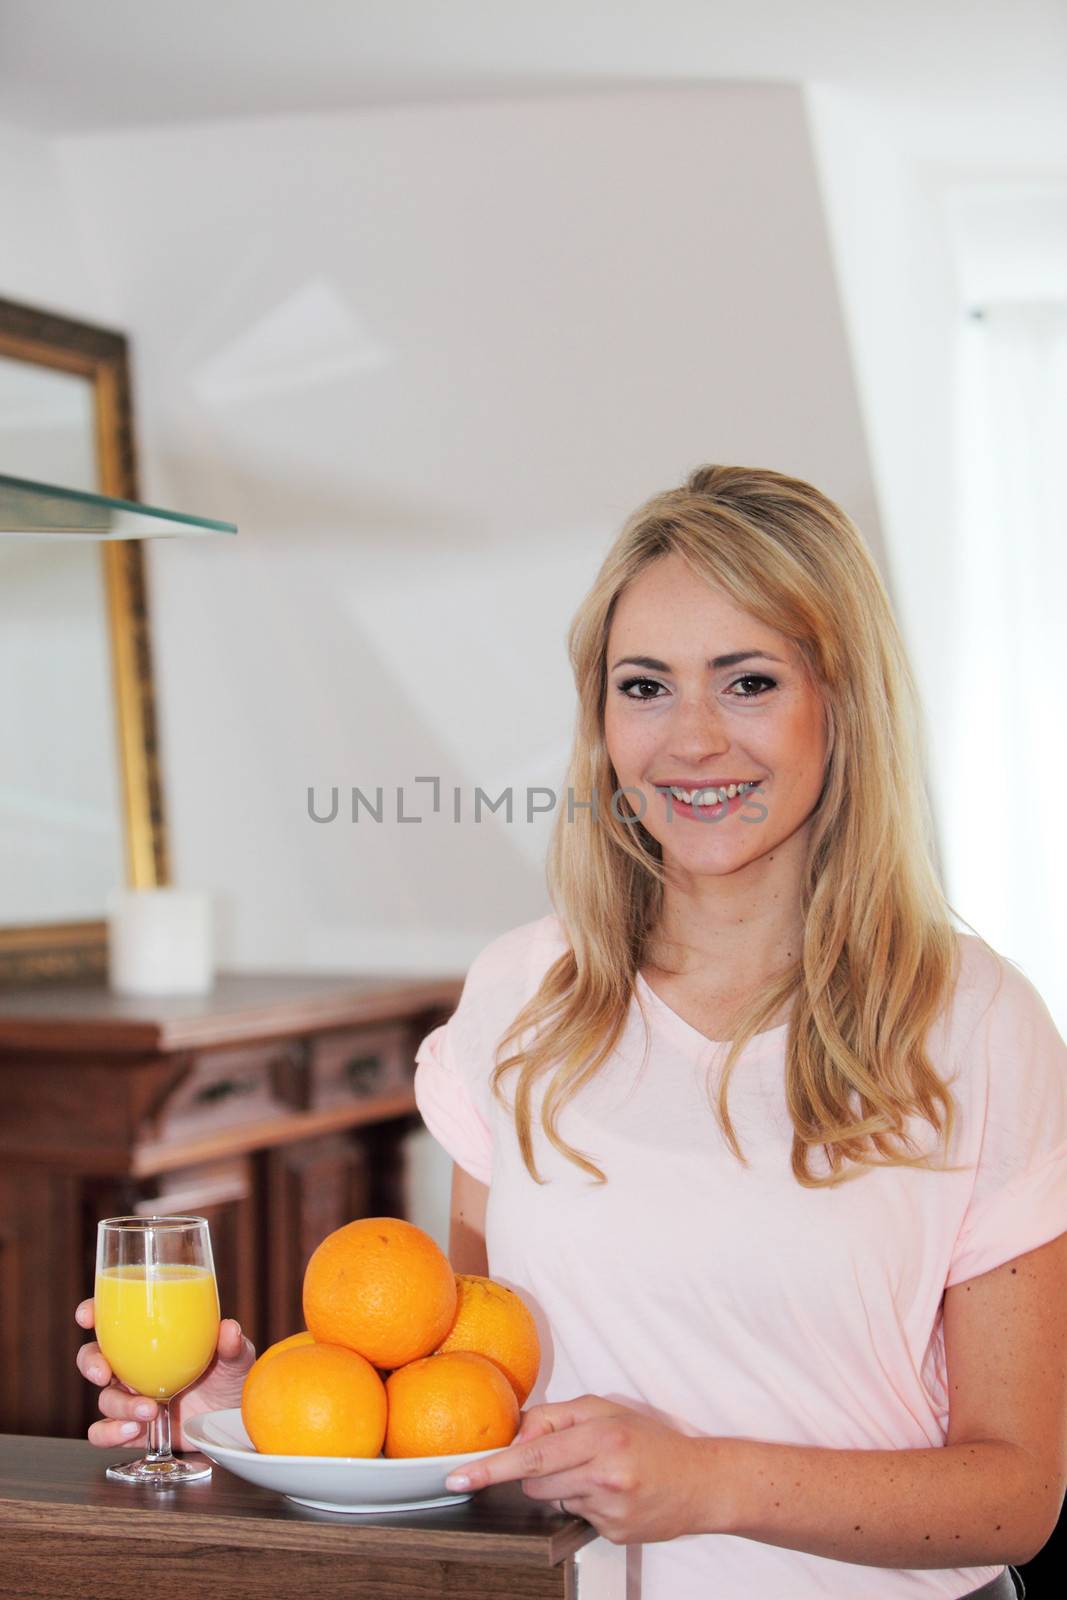 Smiling healthy young woman with a bowl of fresh oranges and a glass of freshly squeezed juice in her hand standing in her house